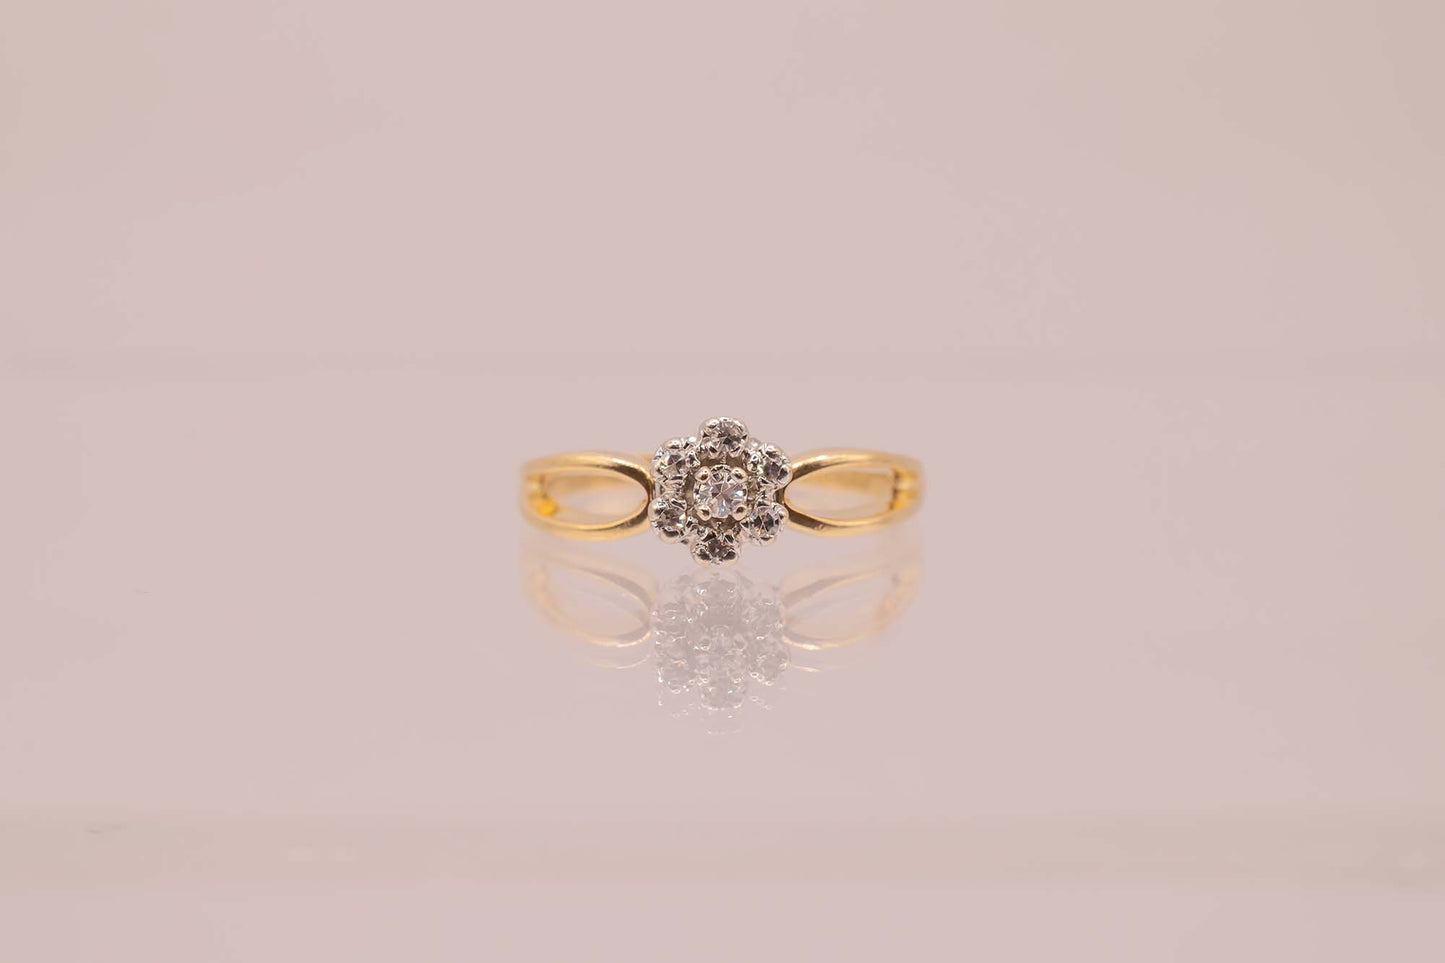 Vintage 14k Yellow and White Gold Princess Flower Cluster Diamond Ring